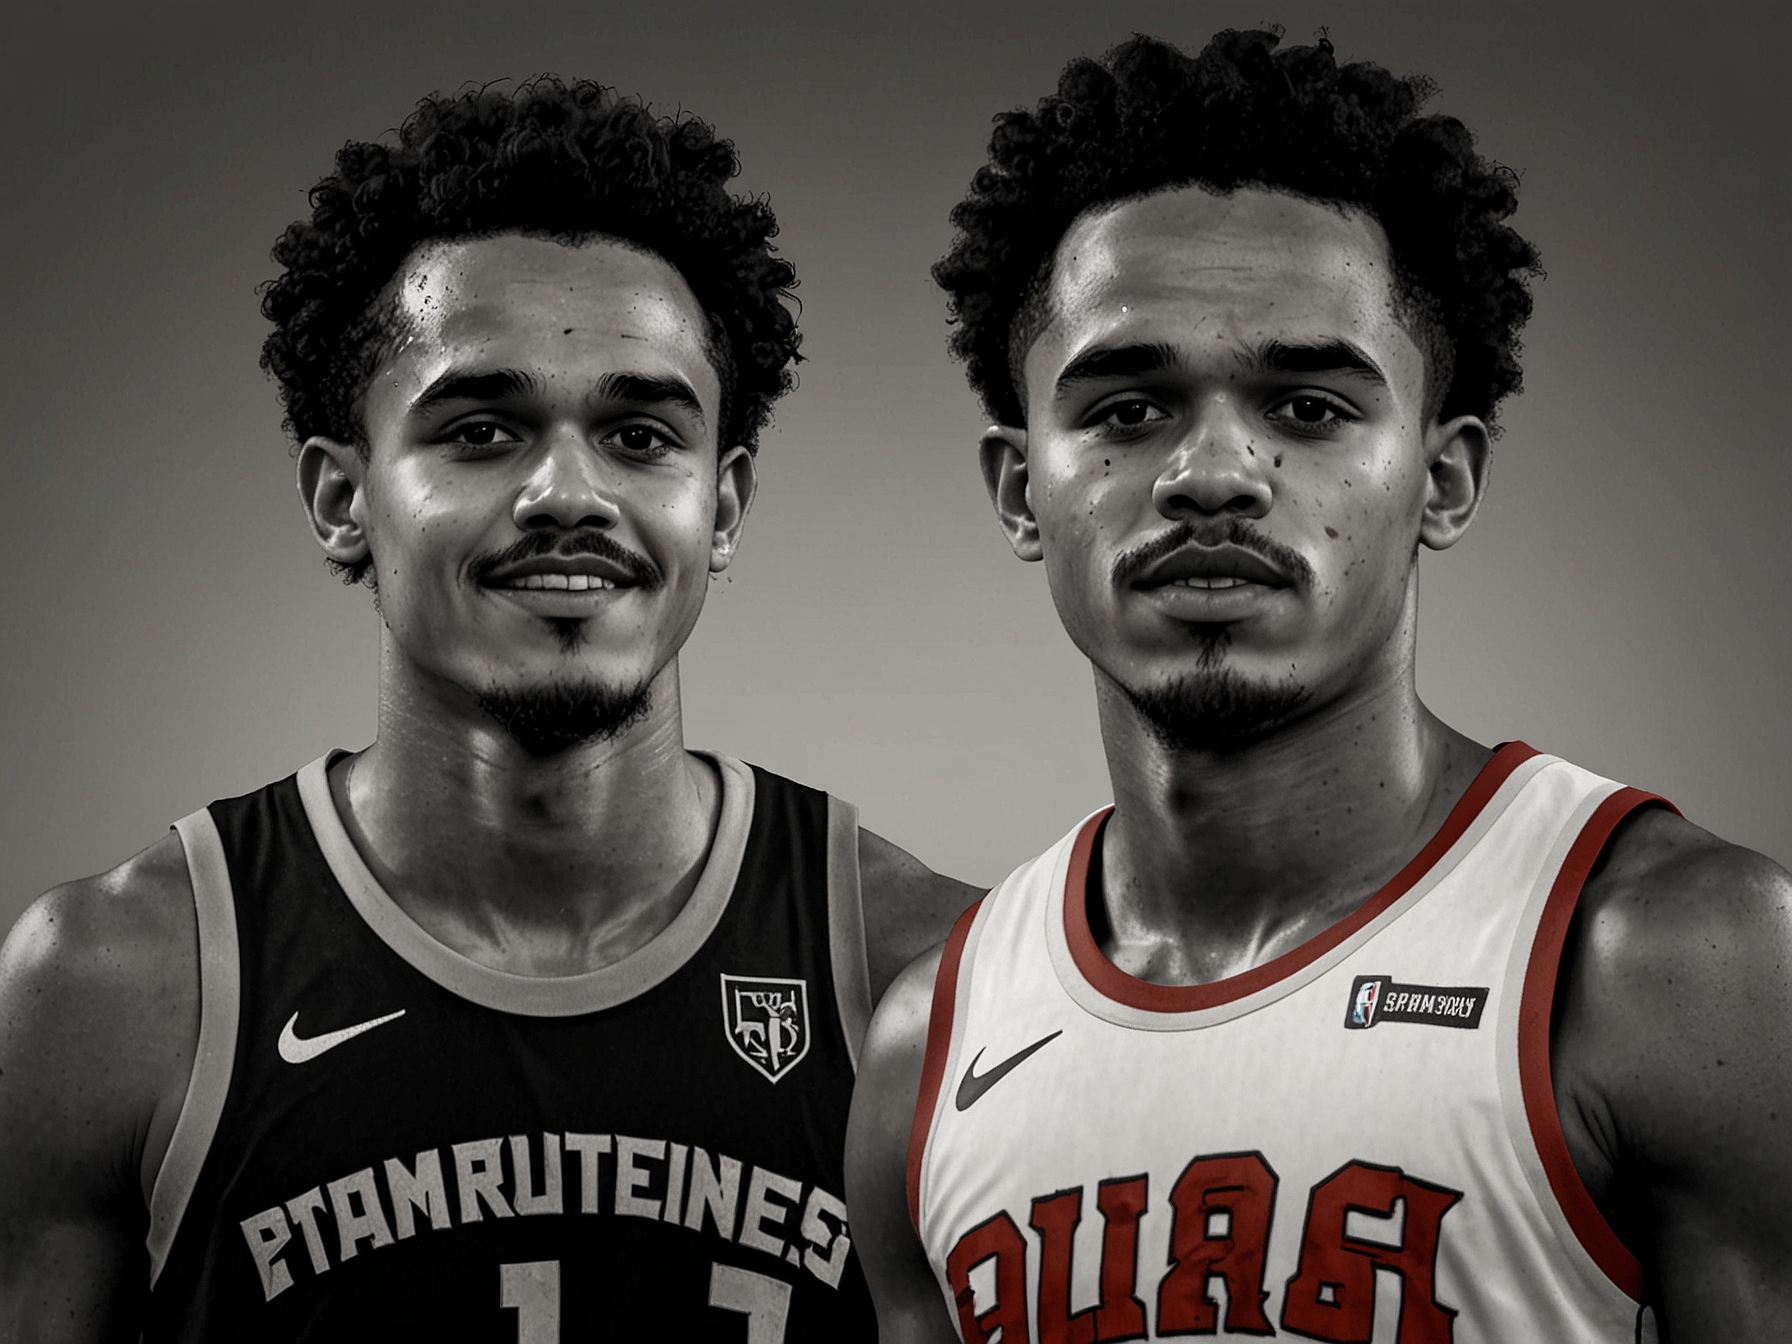 A detailed comparison of Trae Young and Dejounte Murray, highlighting their offensive and defensive stats, and contrasting their unique skill sets and potential trade value.